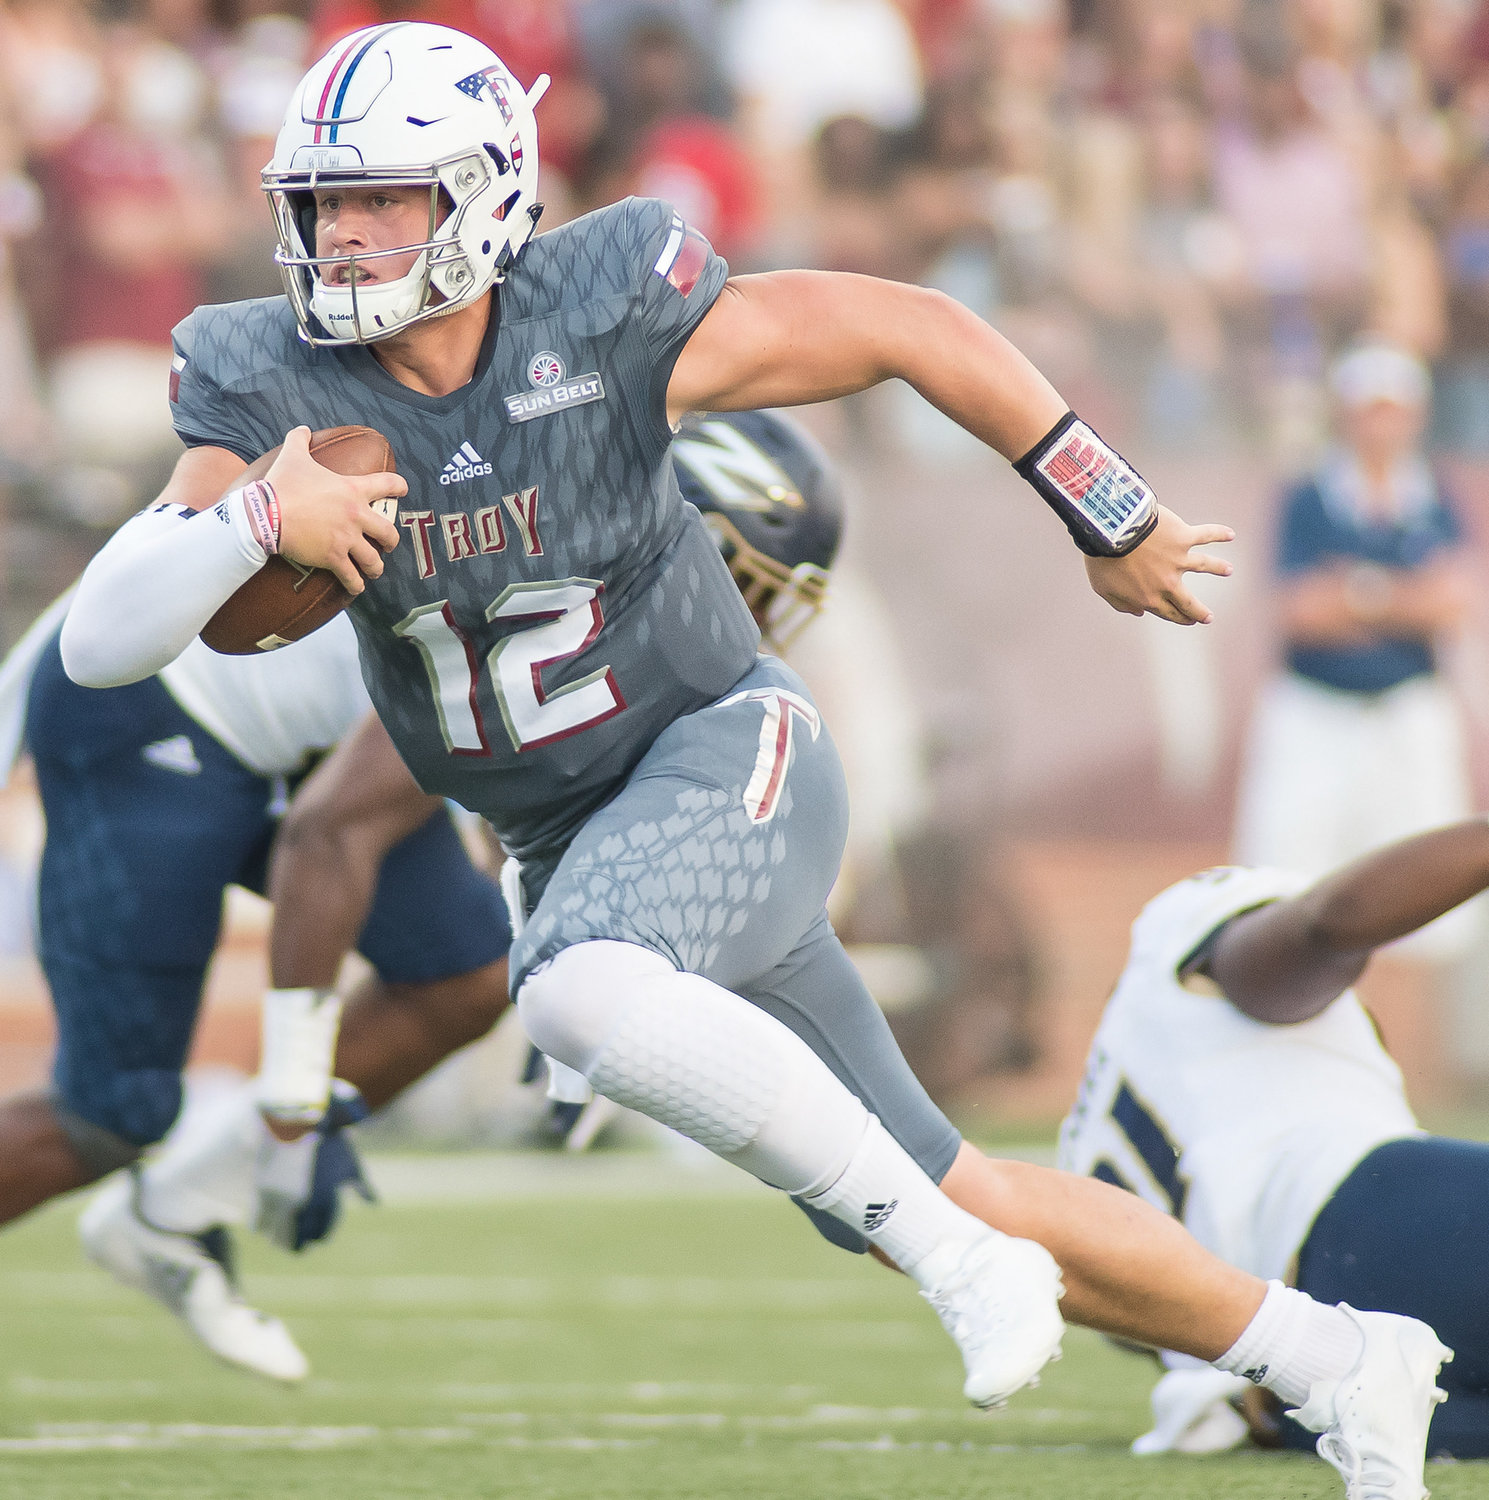 Troy’s Brandon Silvers escapes the pocket and hits the open field during the Trojans’ contest against the Akron Zippers at home Sept. 23, 2017. Sun Belt Conference records for completions, passing percentage and total touchdowns responsible for are still owned by the Gulf Shores Hall of Famer Silvers.